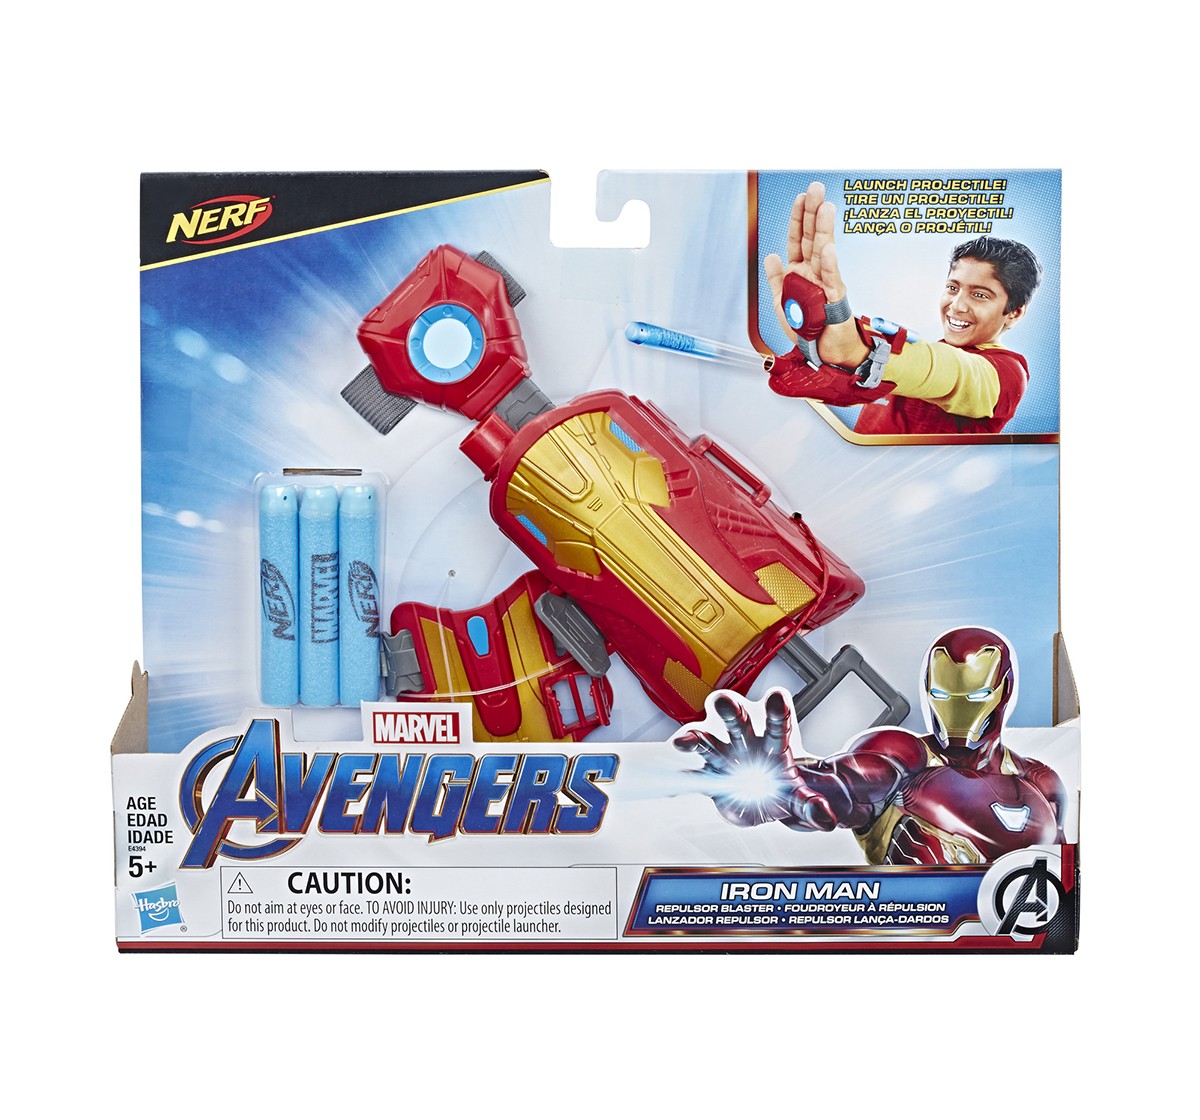 Marvel Avengers Iron Man Repulsor Role Play Action Figure Play Sets for age 5Y+ 